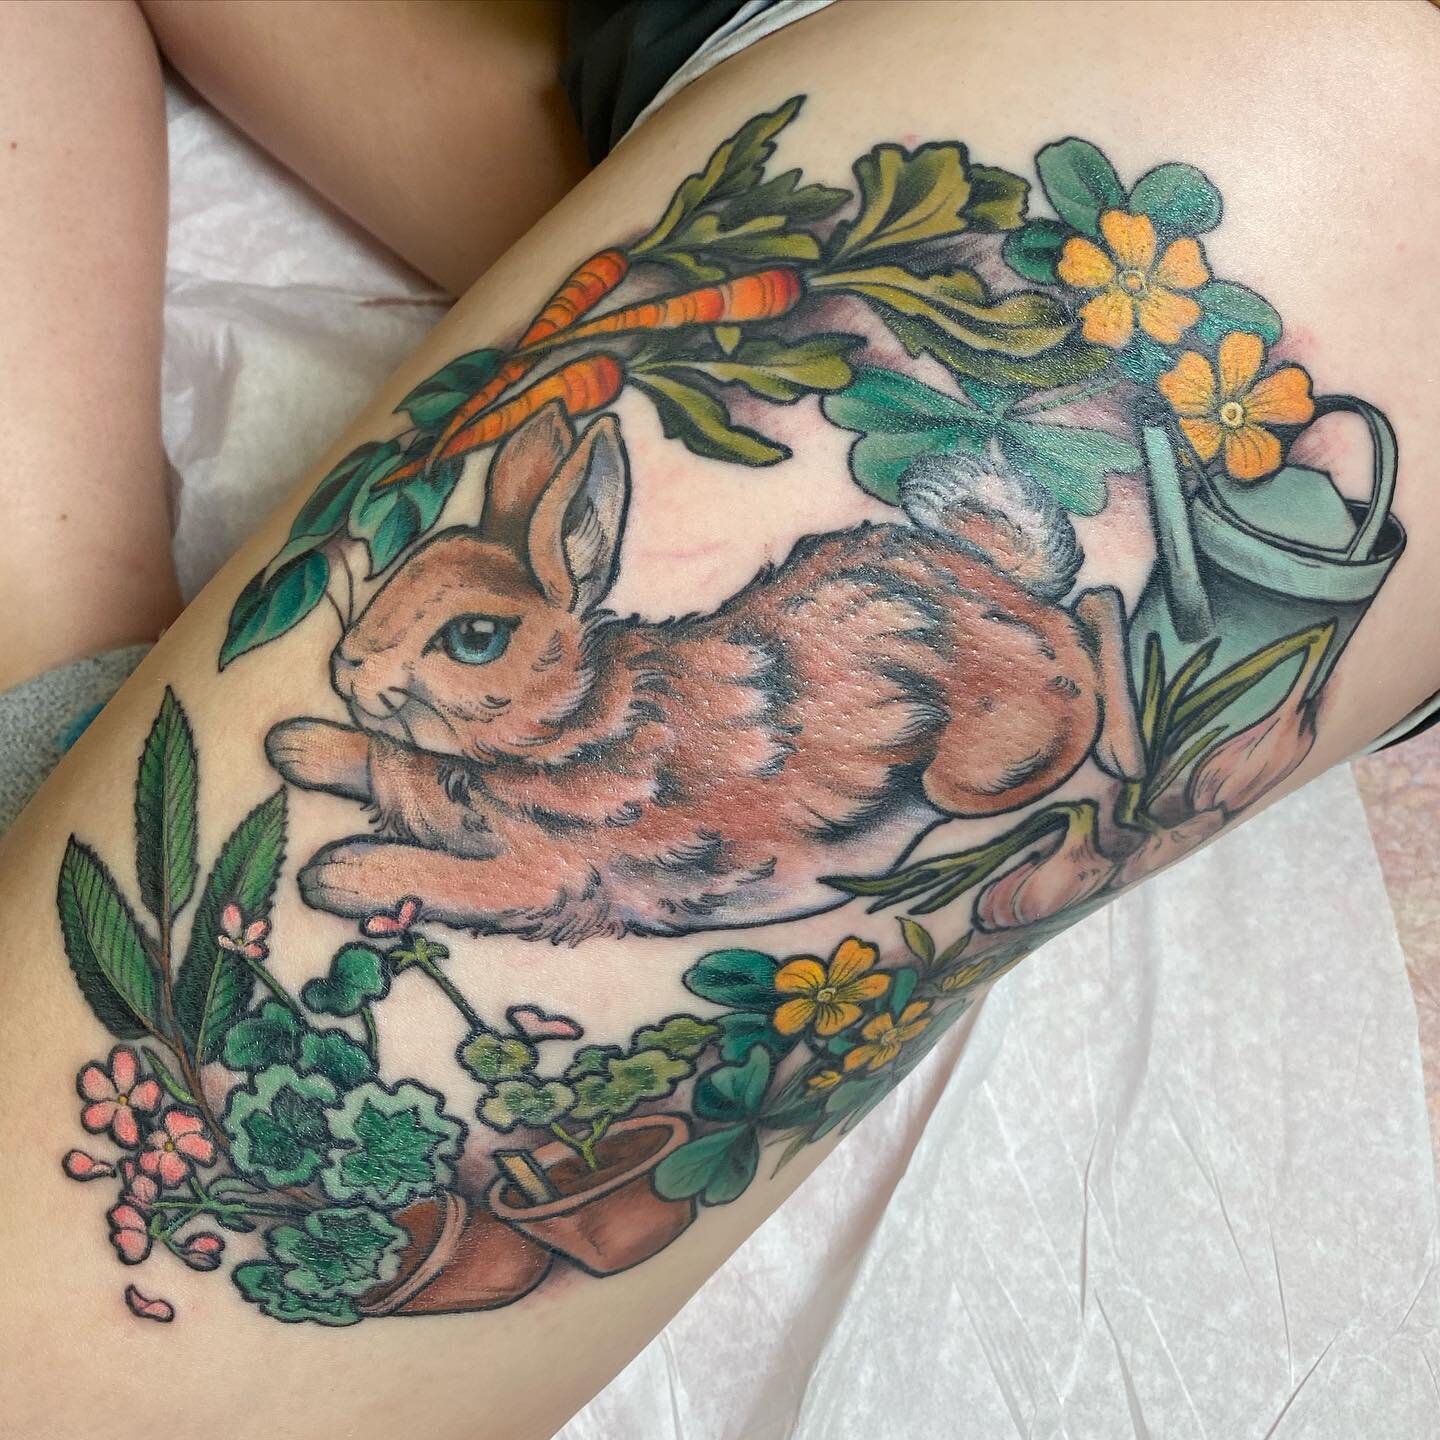 This is the most cottage core tattoo I&rsquo;ve ever done and I loved every minute of it! Thank you Lily! I had so much fun with this Beatrix Potter inspired piece 🧄🥕🐇 half healed, half fresh
@whitedogtattooky 
(I have the hardest time getting pho